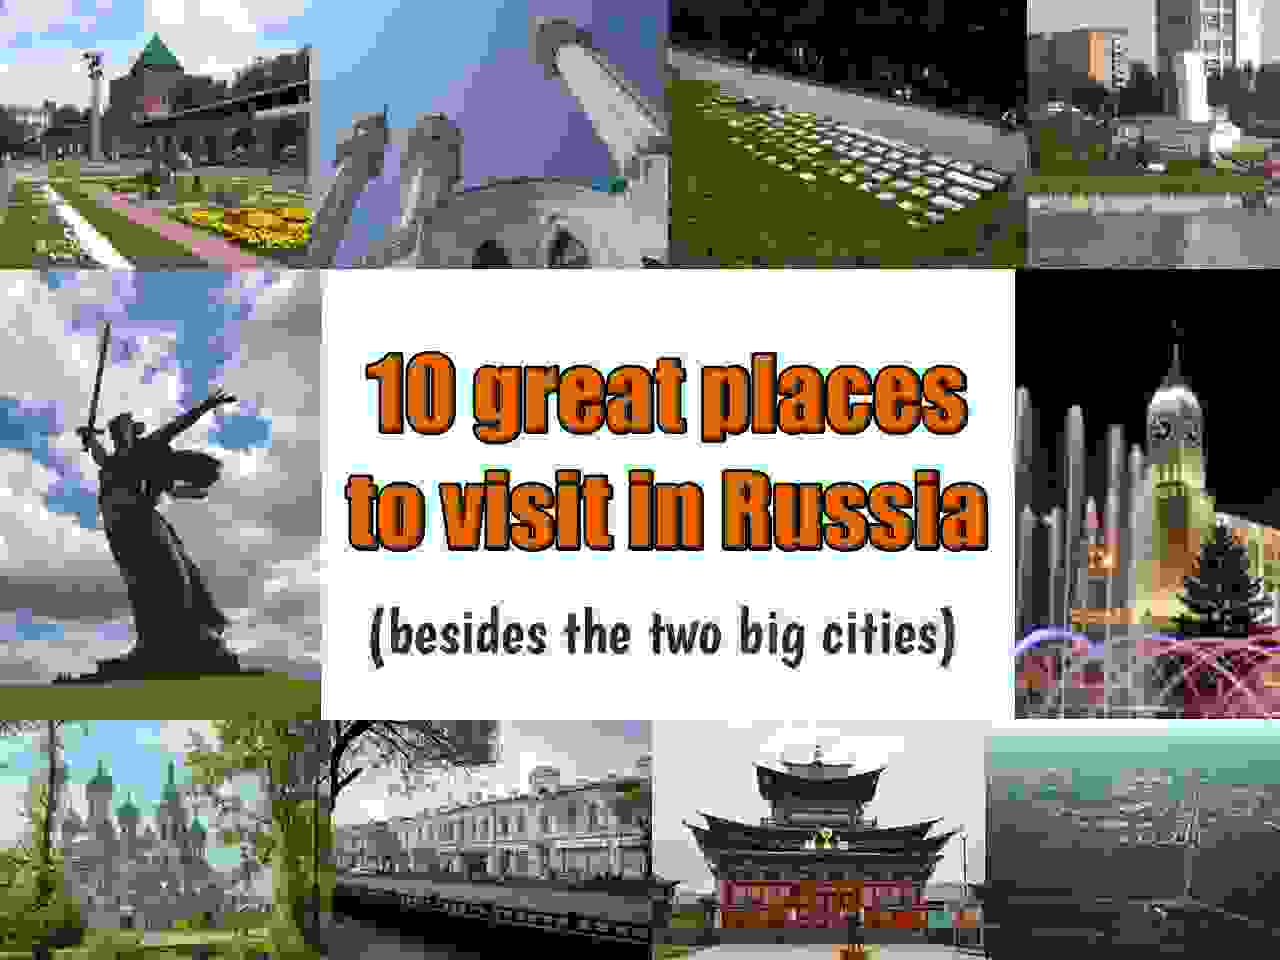 10 great places to visit in Russia